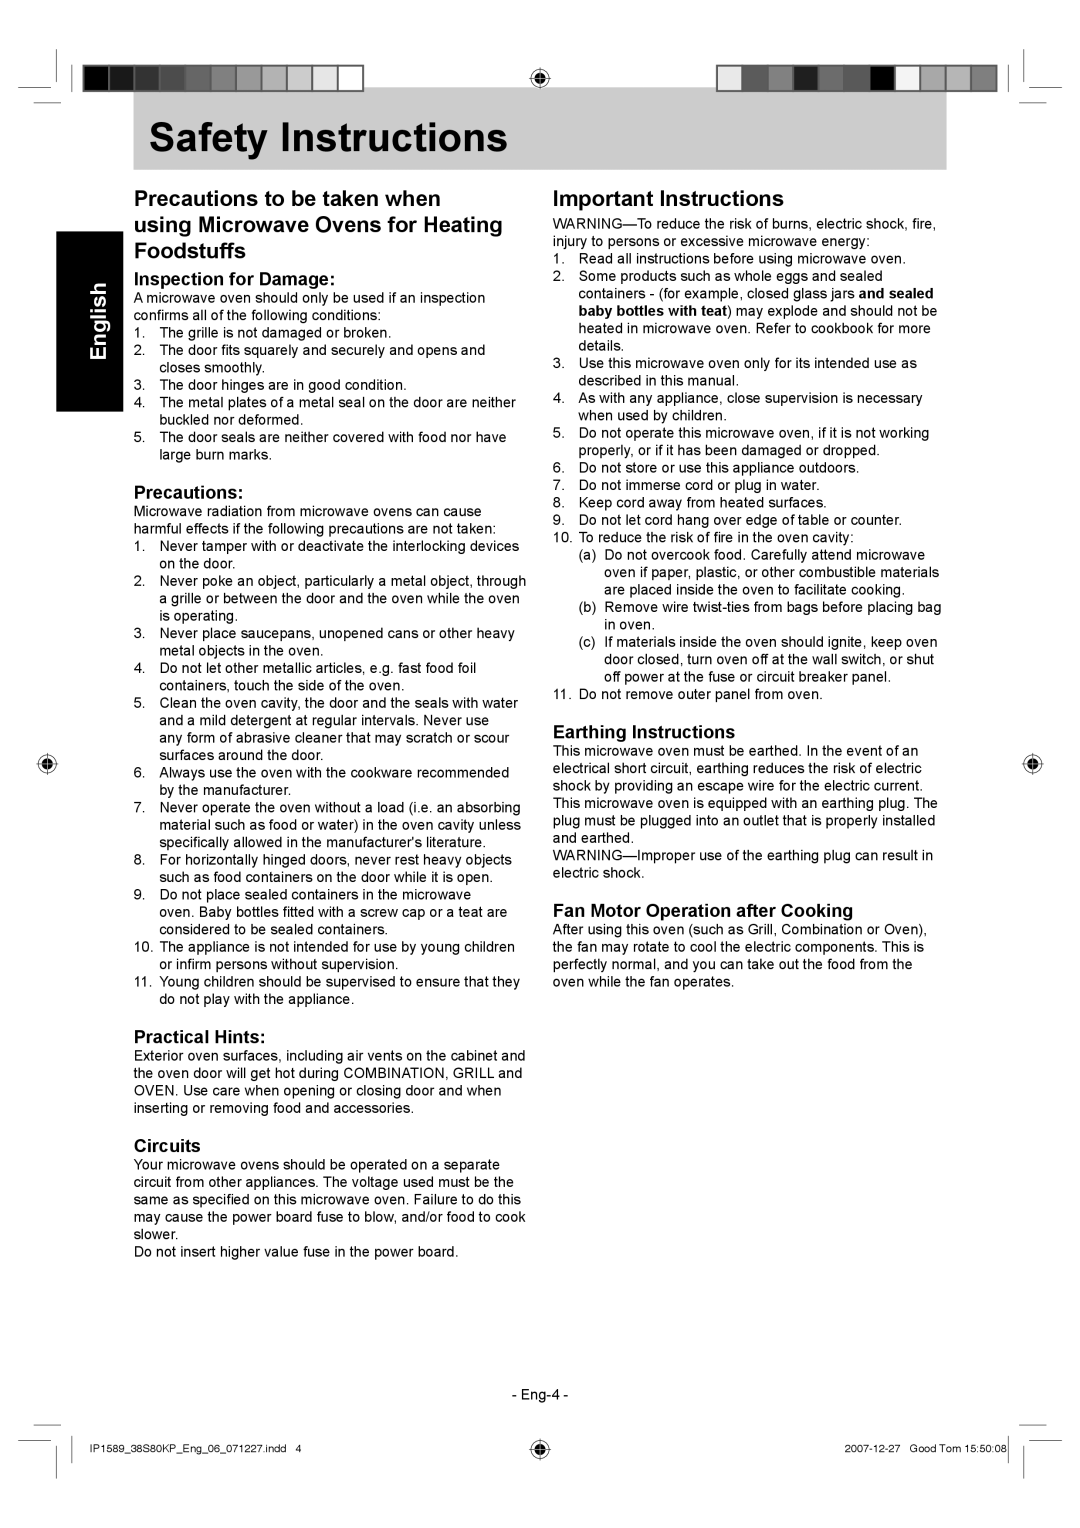 Panasonic NN-GS597M Safety Instructions, Important Instructions, Inspection for Damage, Precautions, Practical Hints 